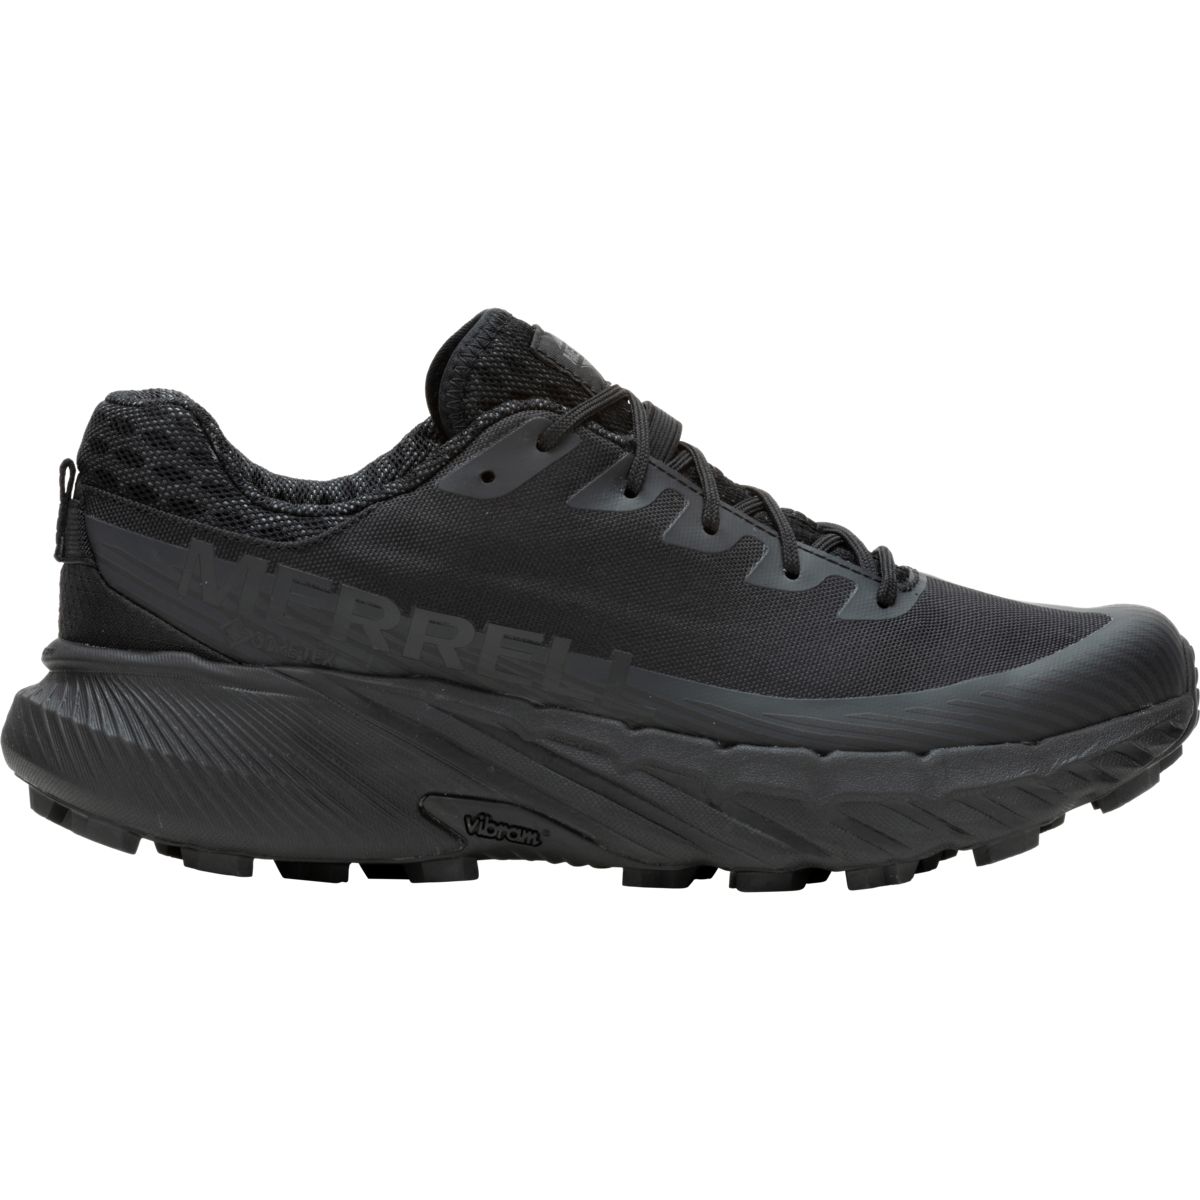 Tactical Work Hiking Boots & Shoes | Merrell